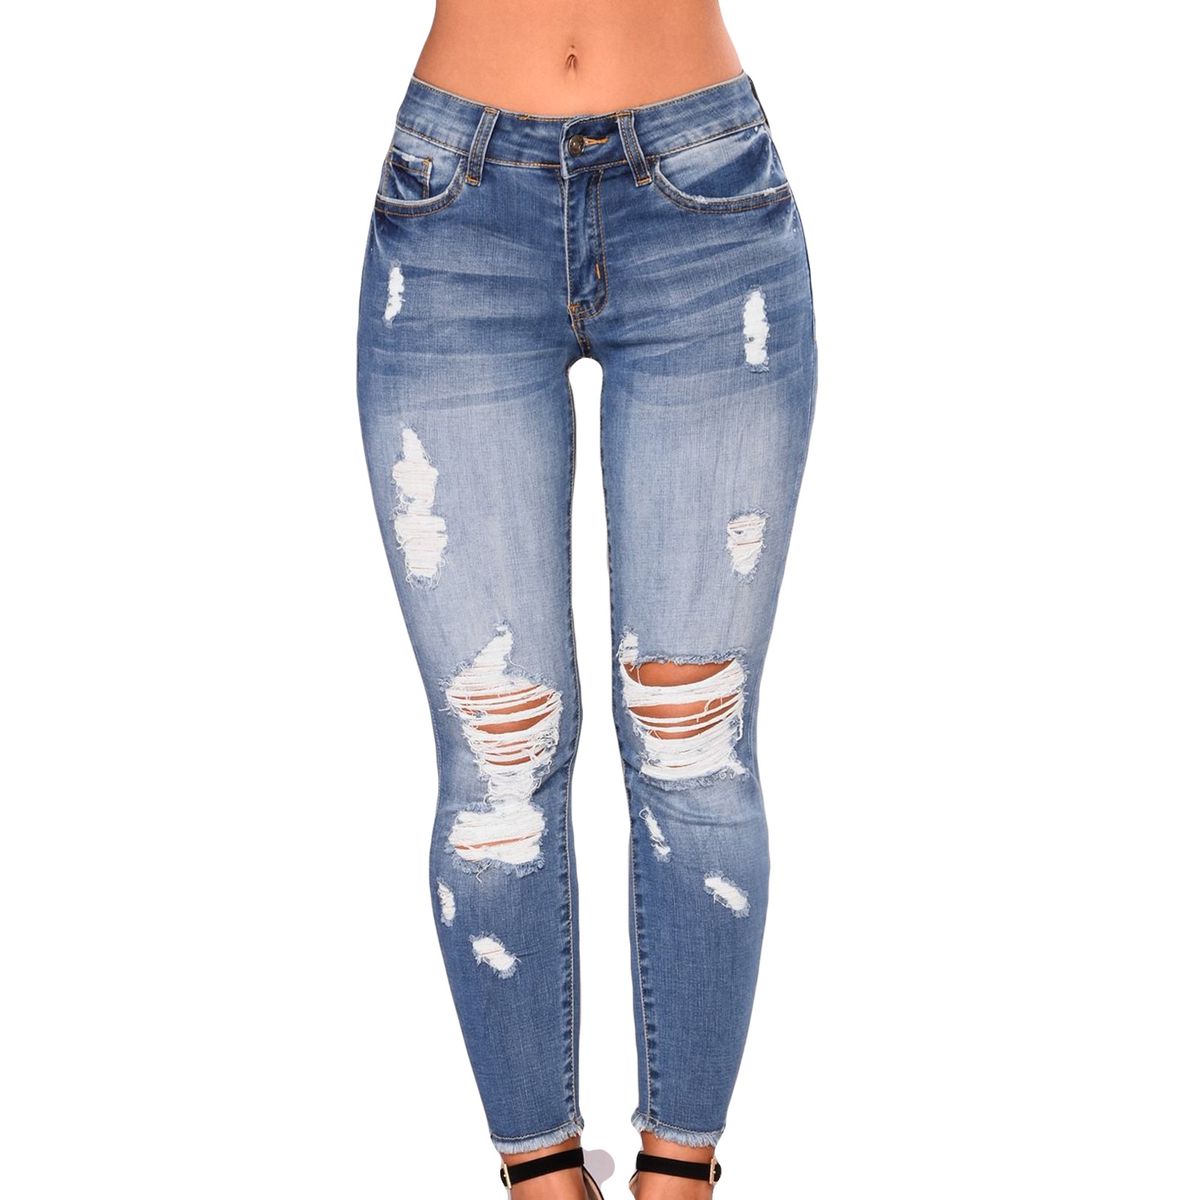 Ripped Skinny Jeans For Women - Light Blue | Shop Today. Get it ...